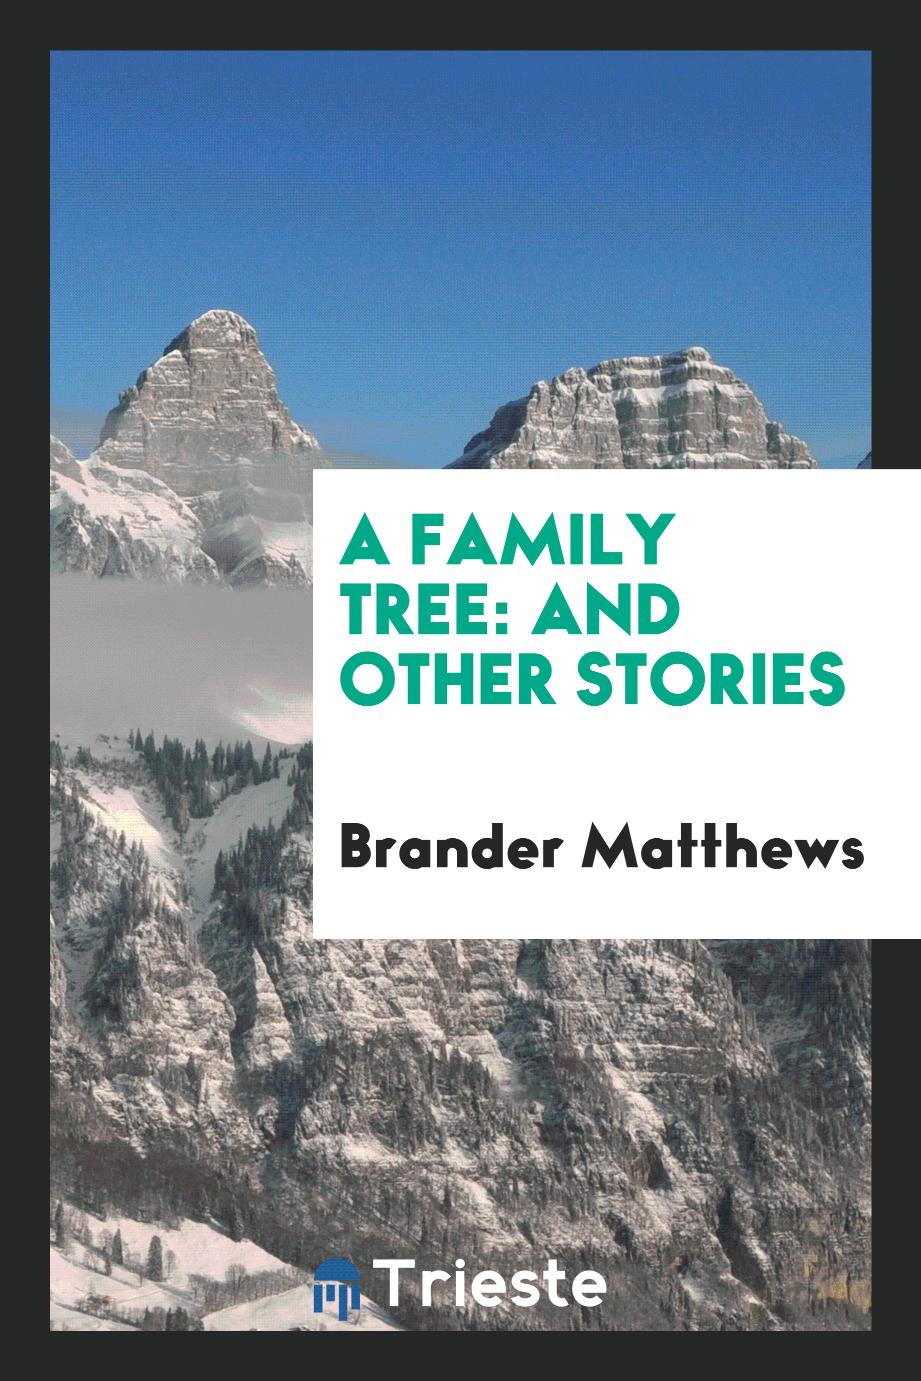 A Family Tree: And Other Stories